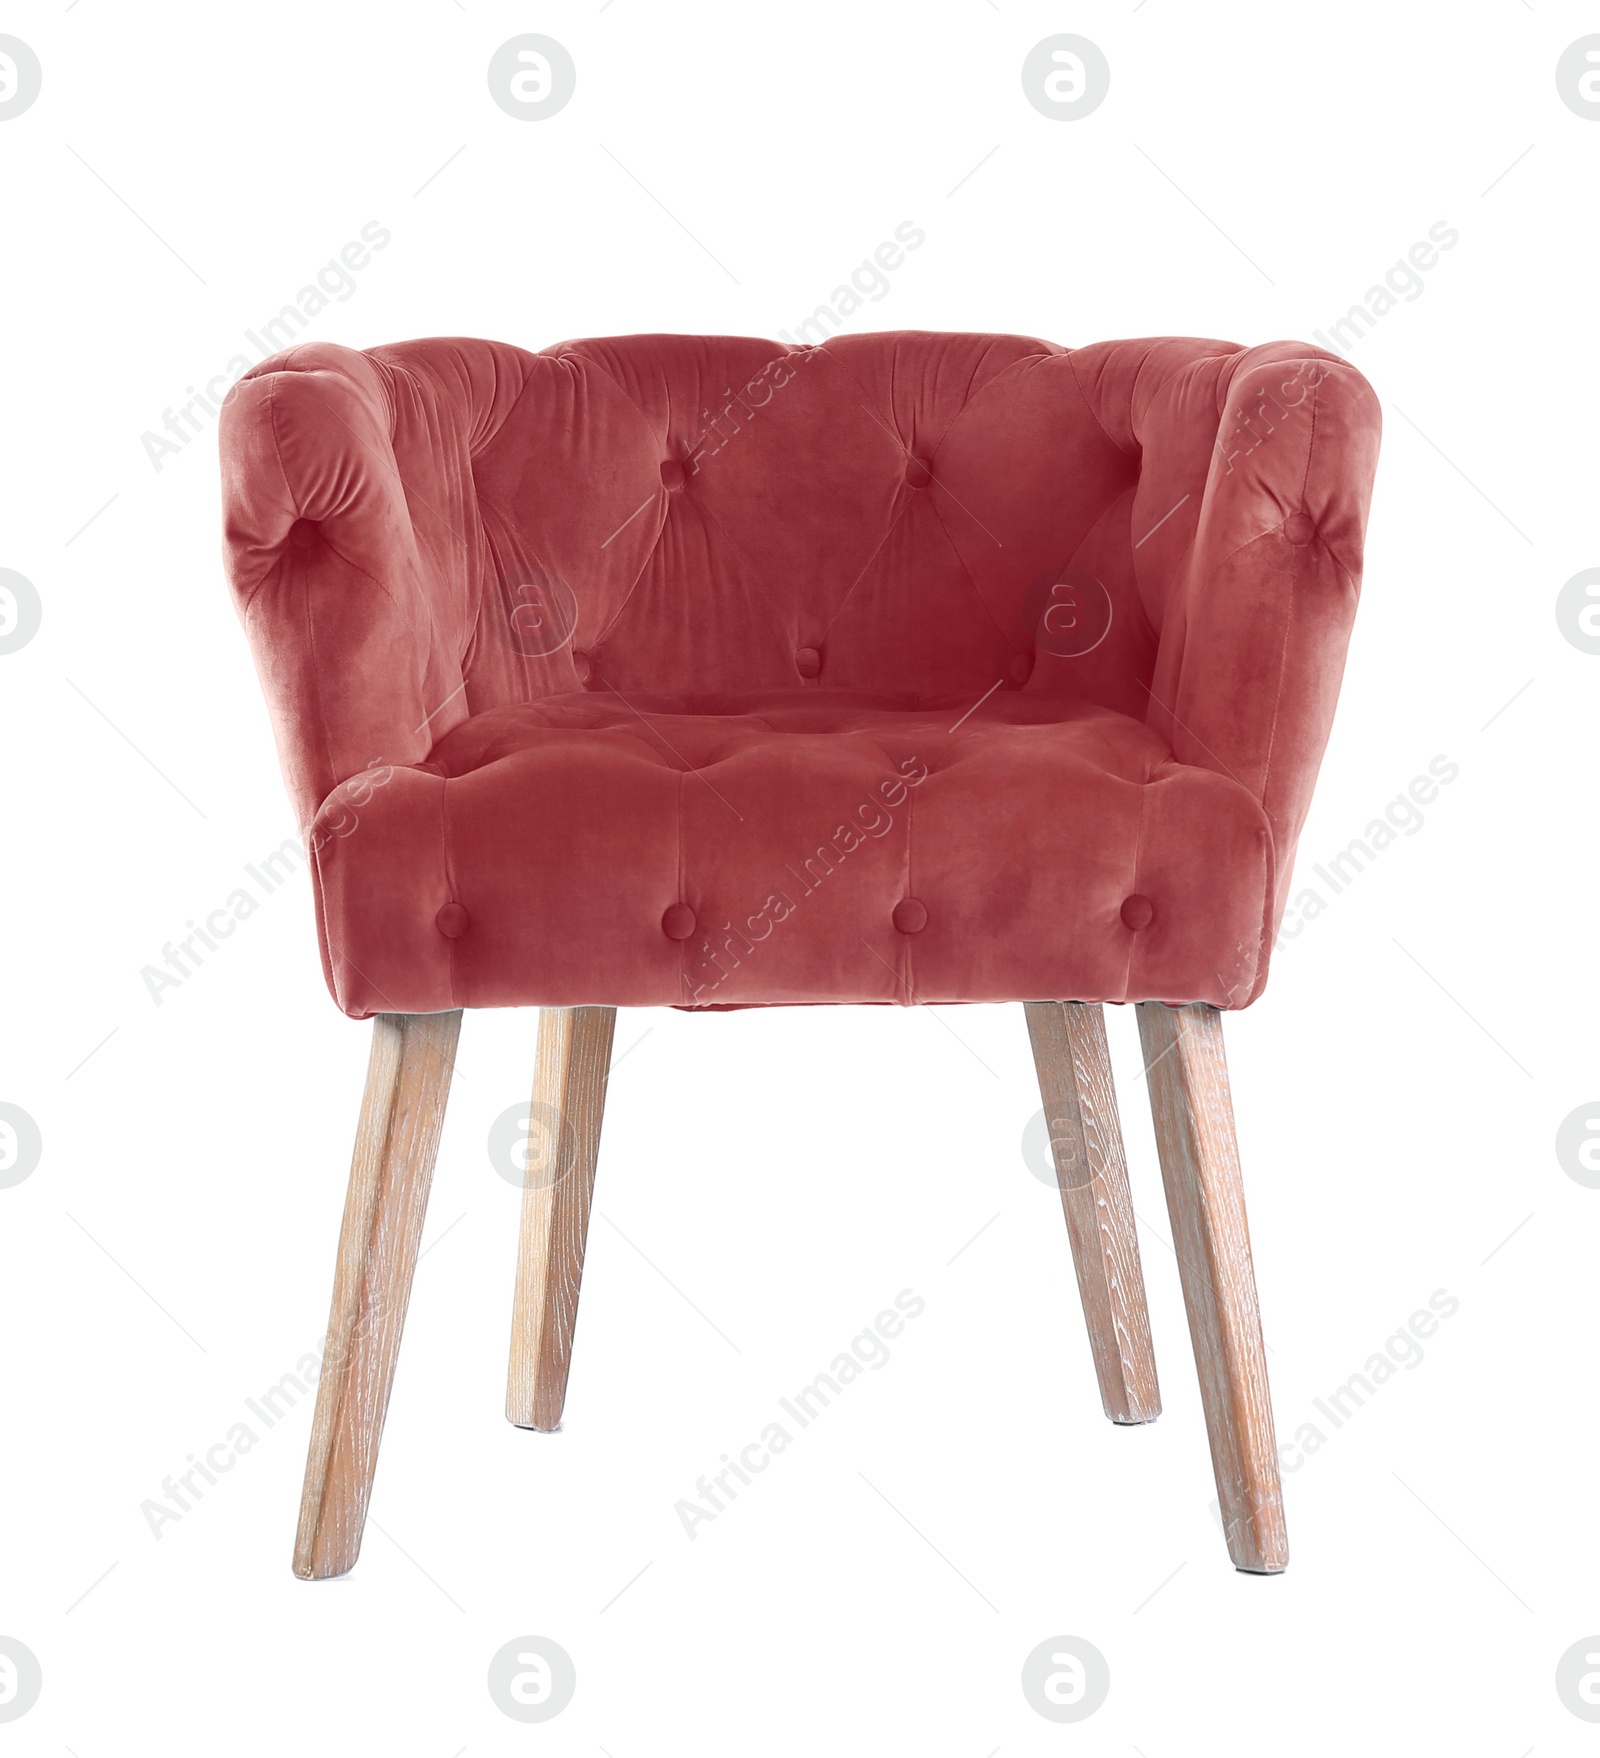 Image of One comfortable red armchair isolated on white